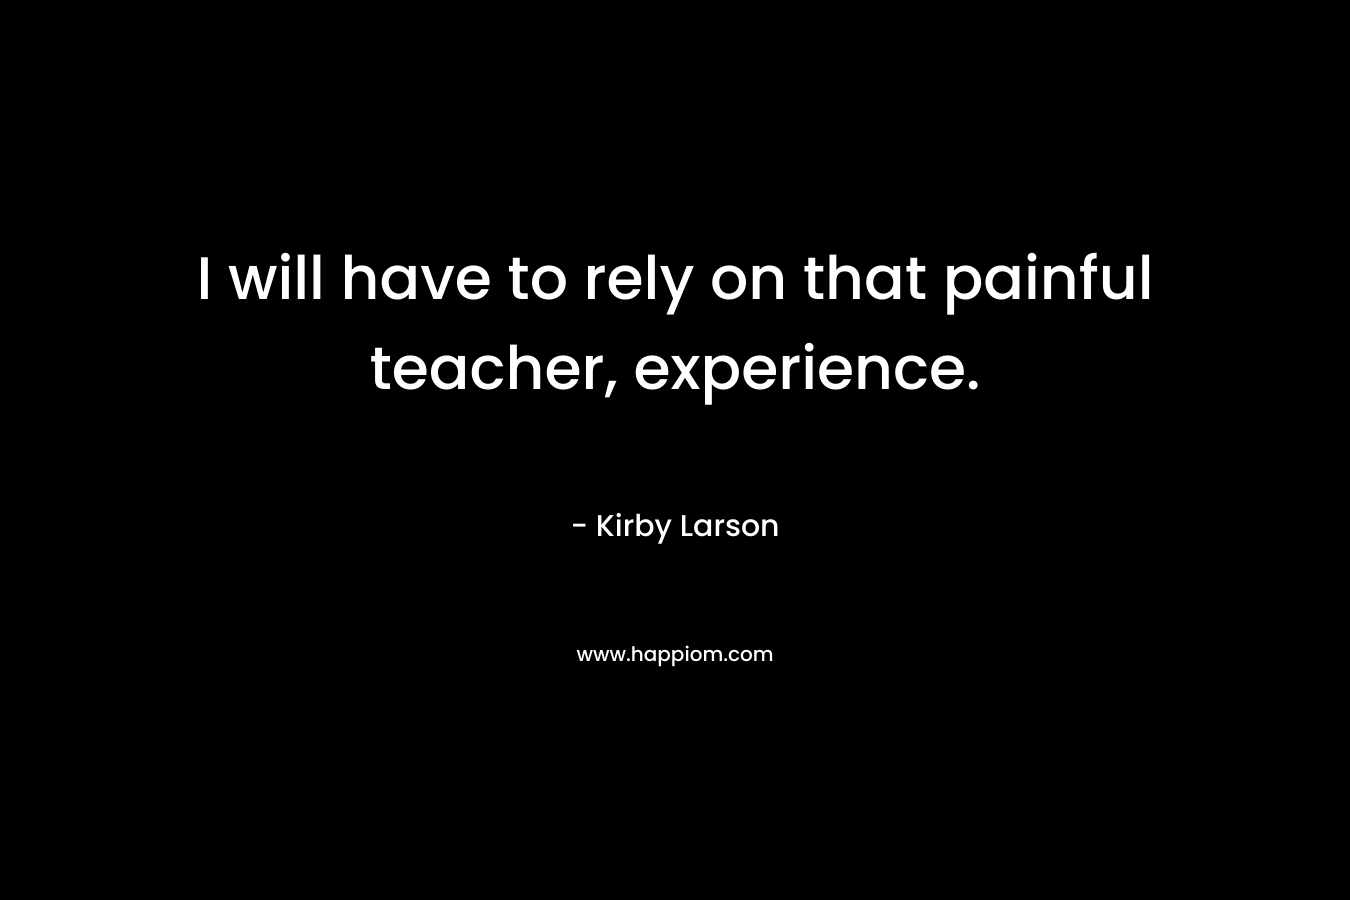 I will have to rely on that painful teacher, experience.